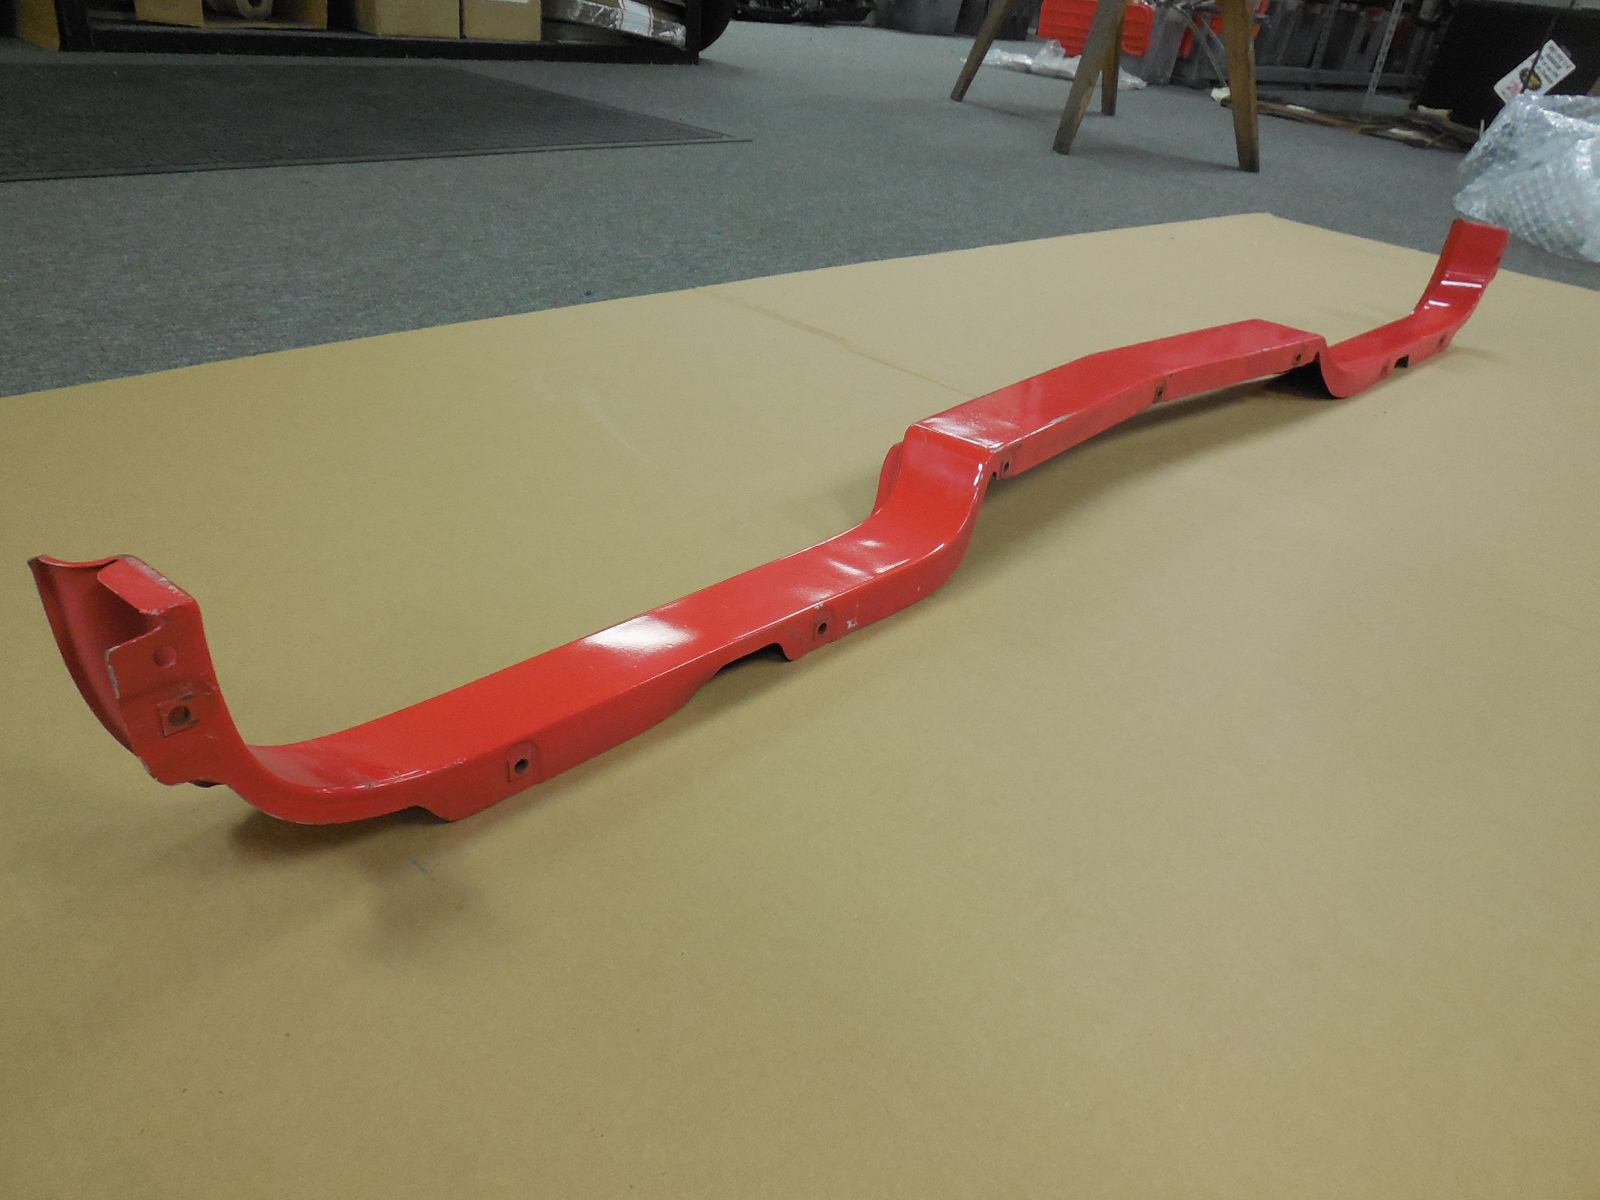 1967 Oldsmobile Cutlass 442 front bumper valance. Clean! Call for details 209-462-4300.